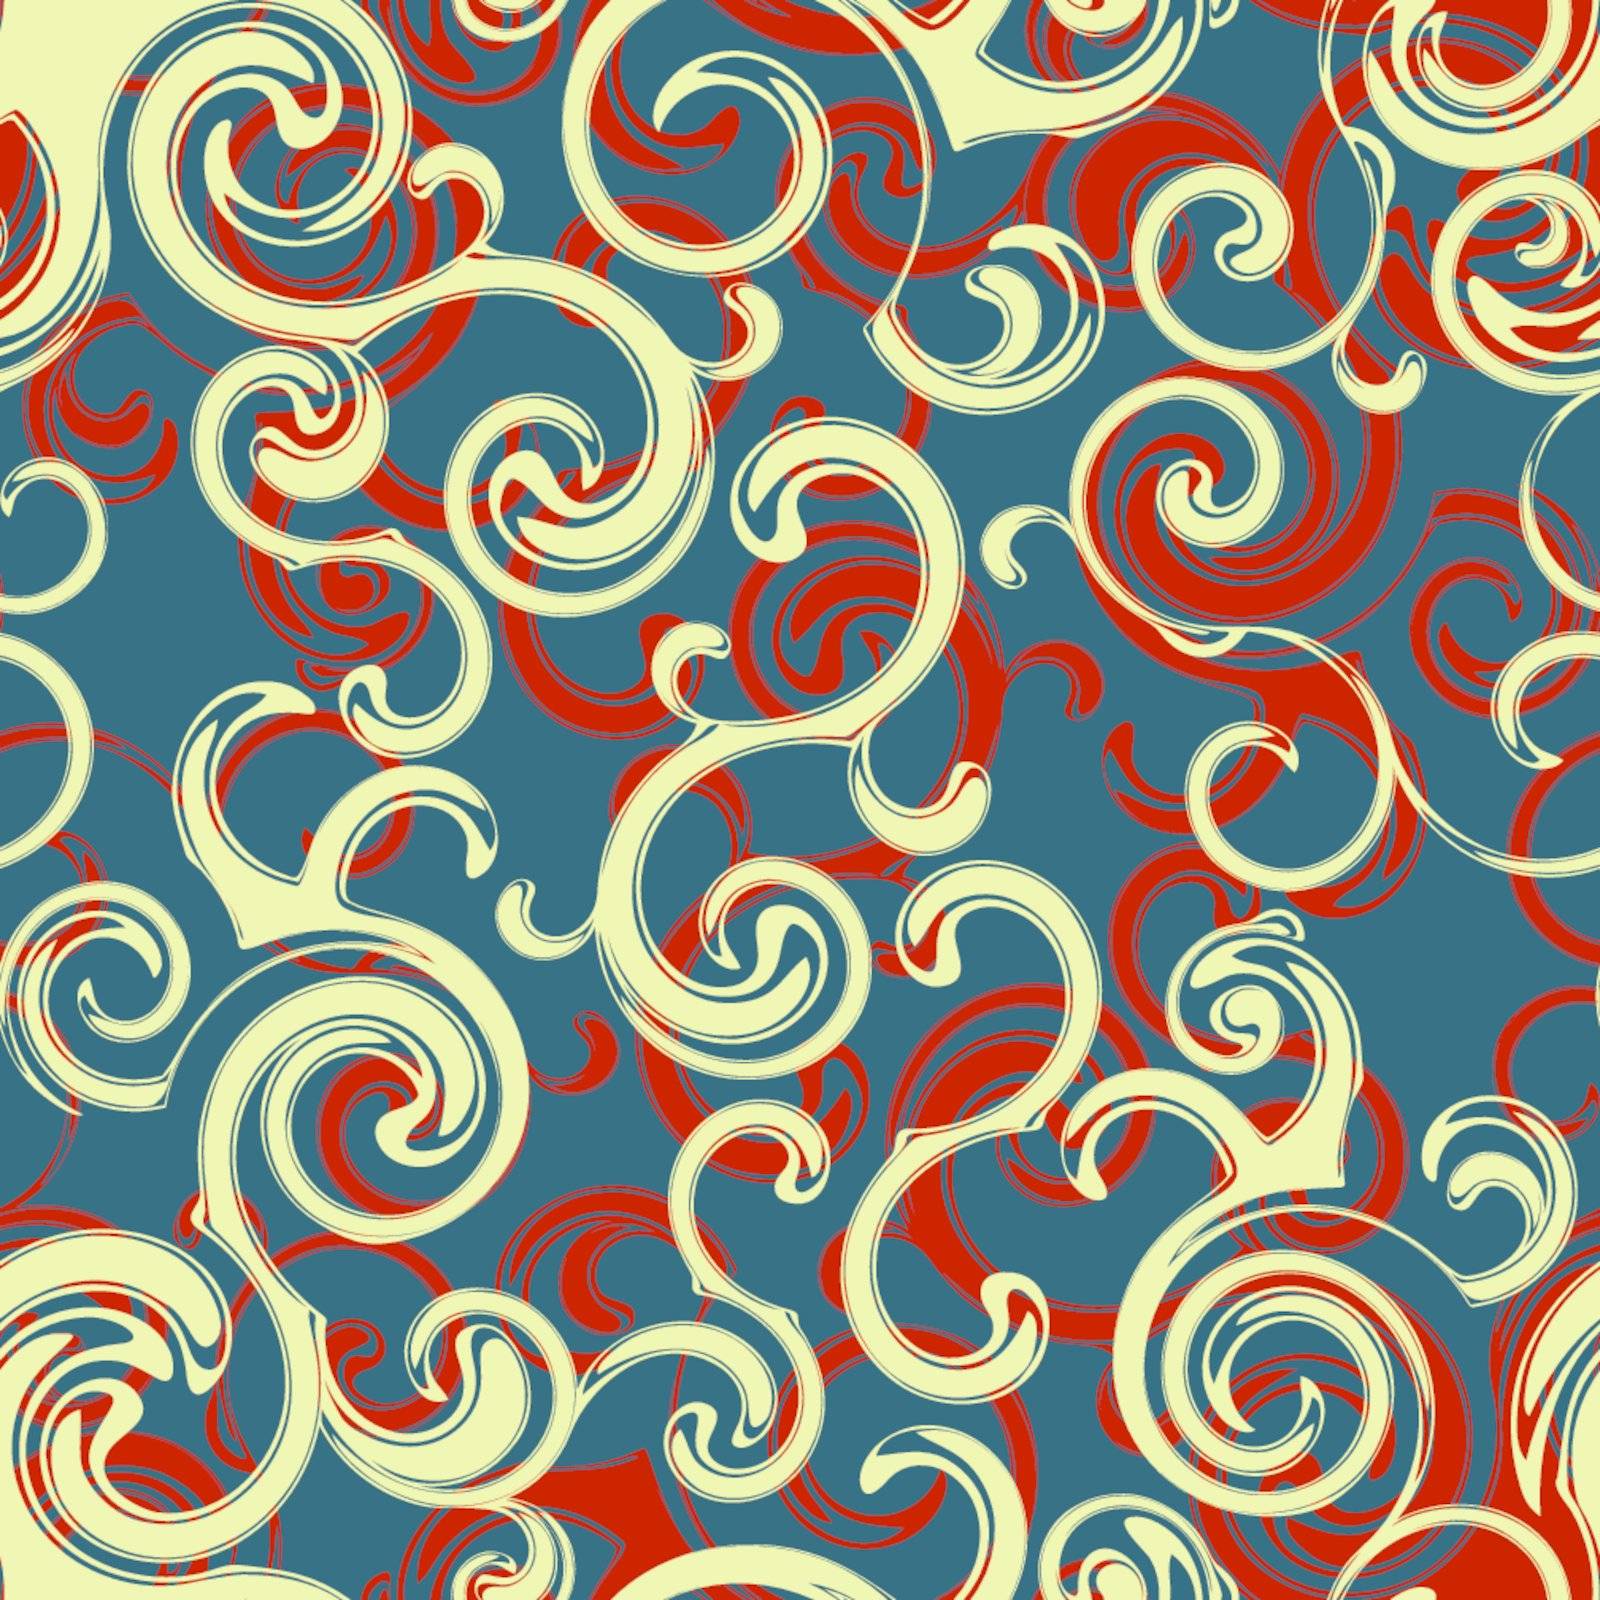 Curly tile by Tawng